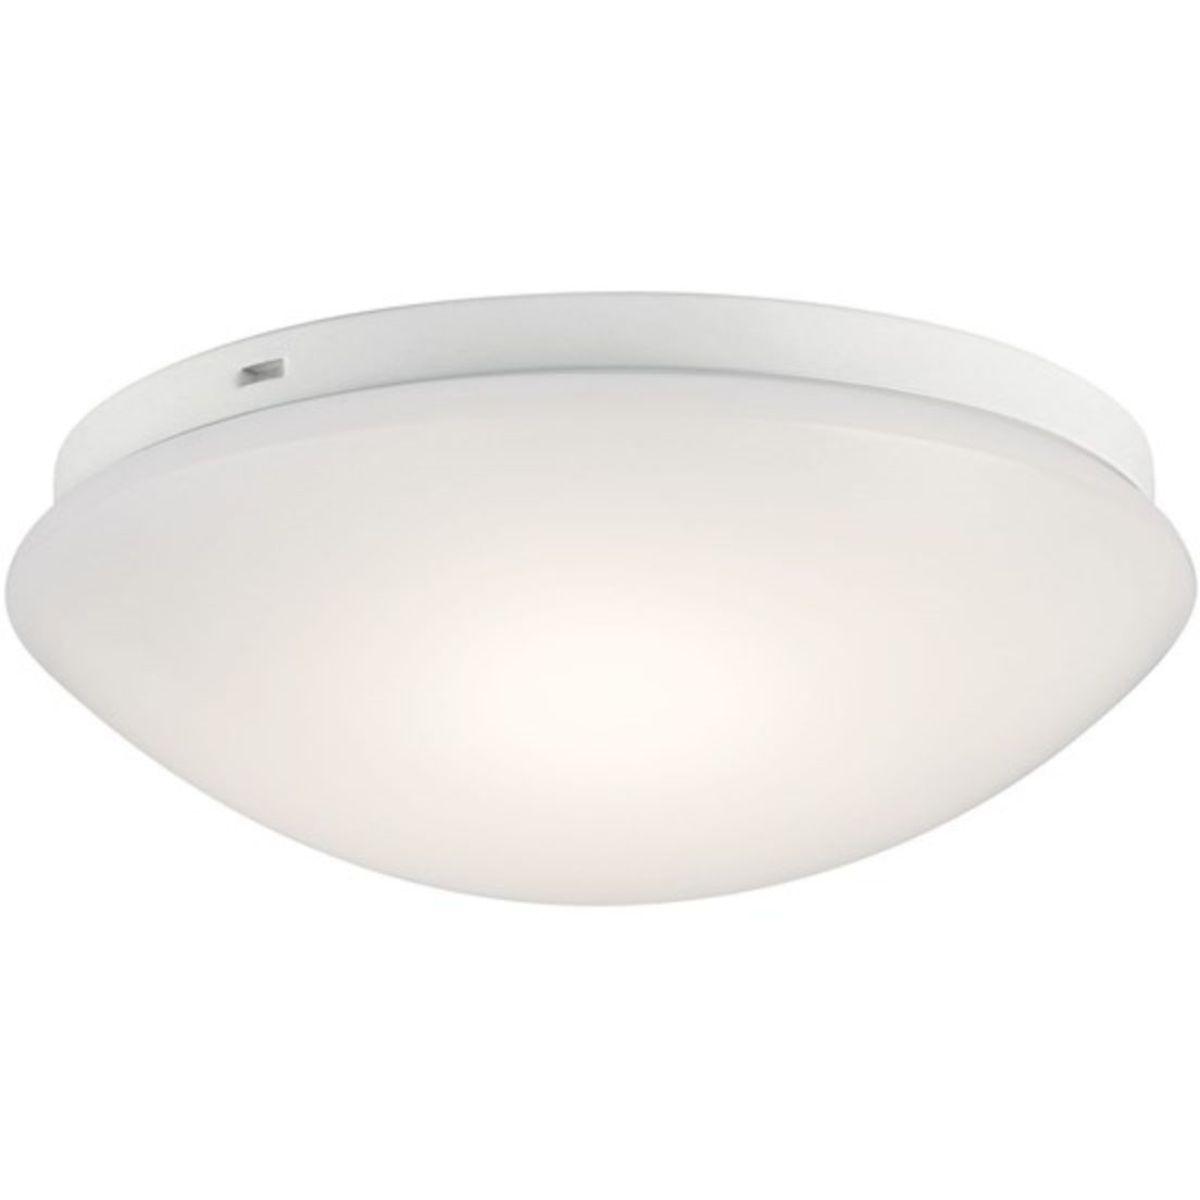 Ceiling Space 11 in. LED Puff Light 1080 Lumens 3000K White finish